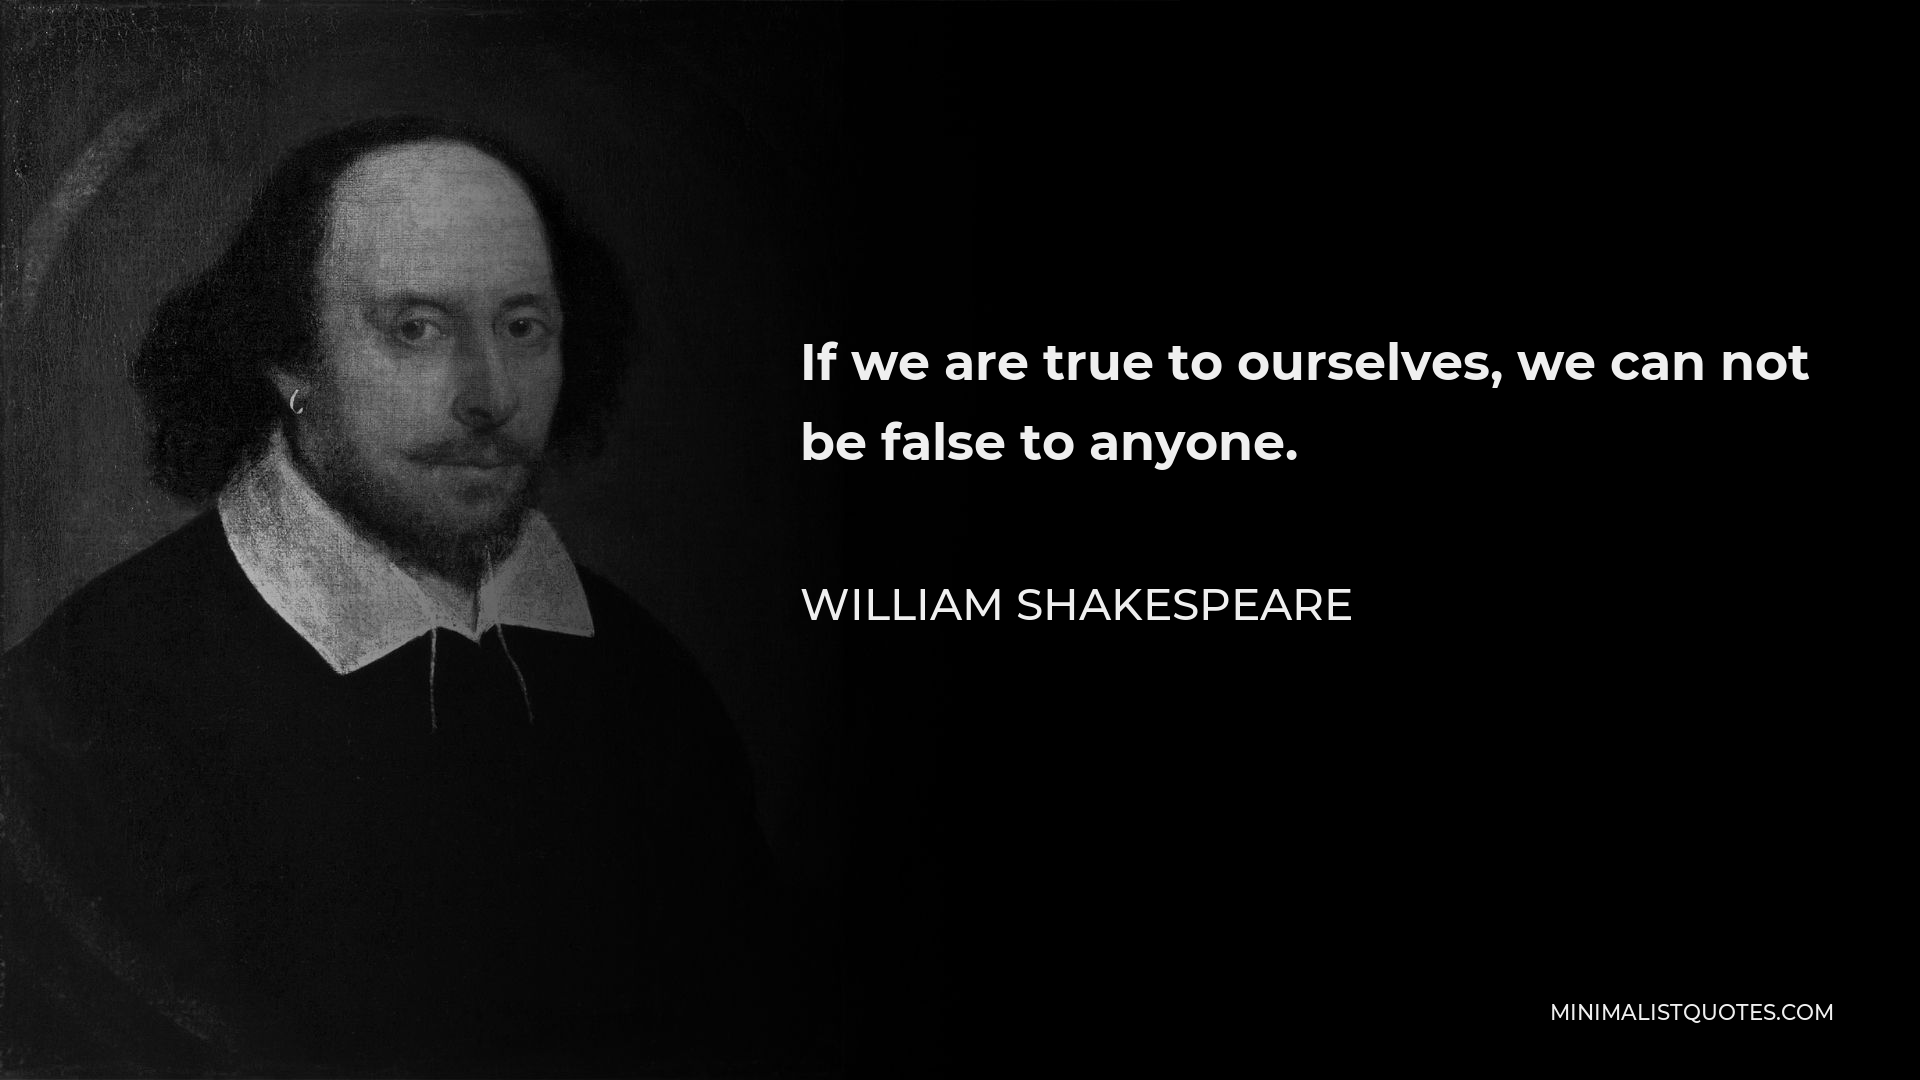 William Shakespeare Quote - If we are true to ourselves, we can not be false to anyone.